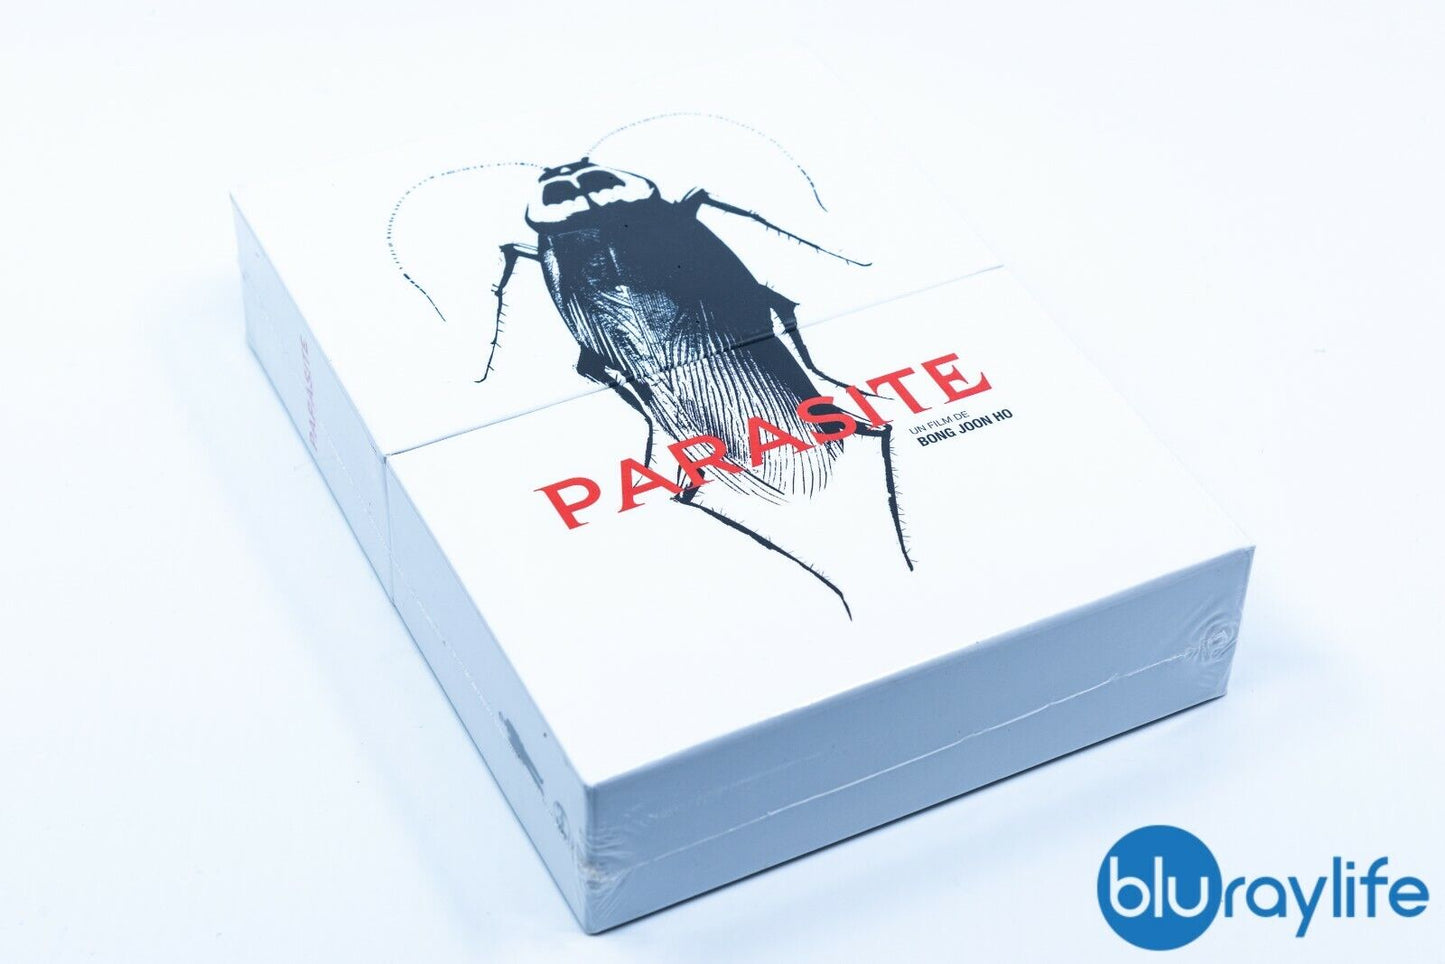 Parasite 4K Blu-ray Steelbook The Jokers Shop Exclusive Box Edition